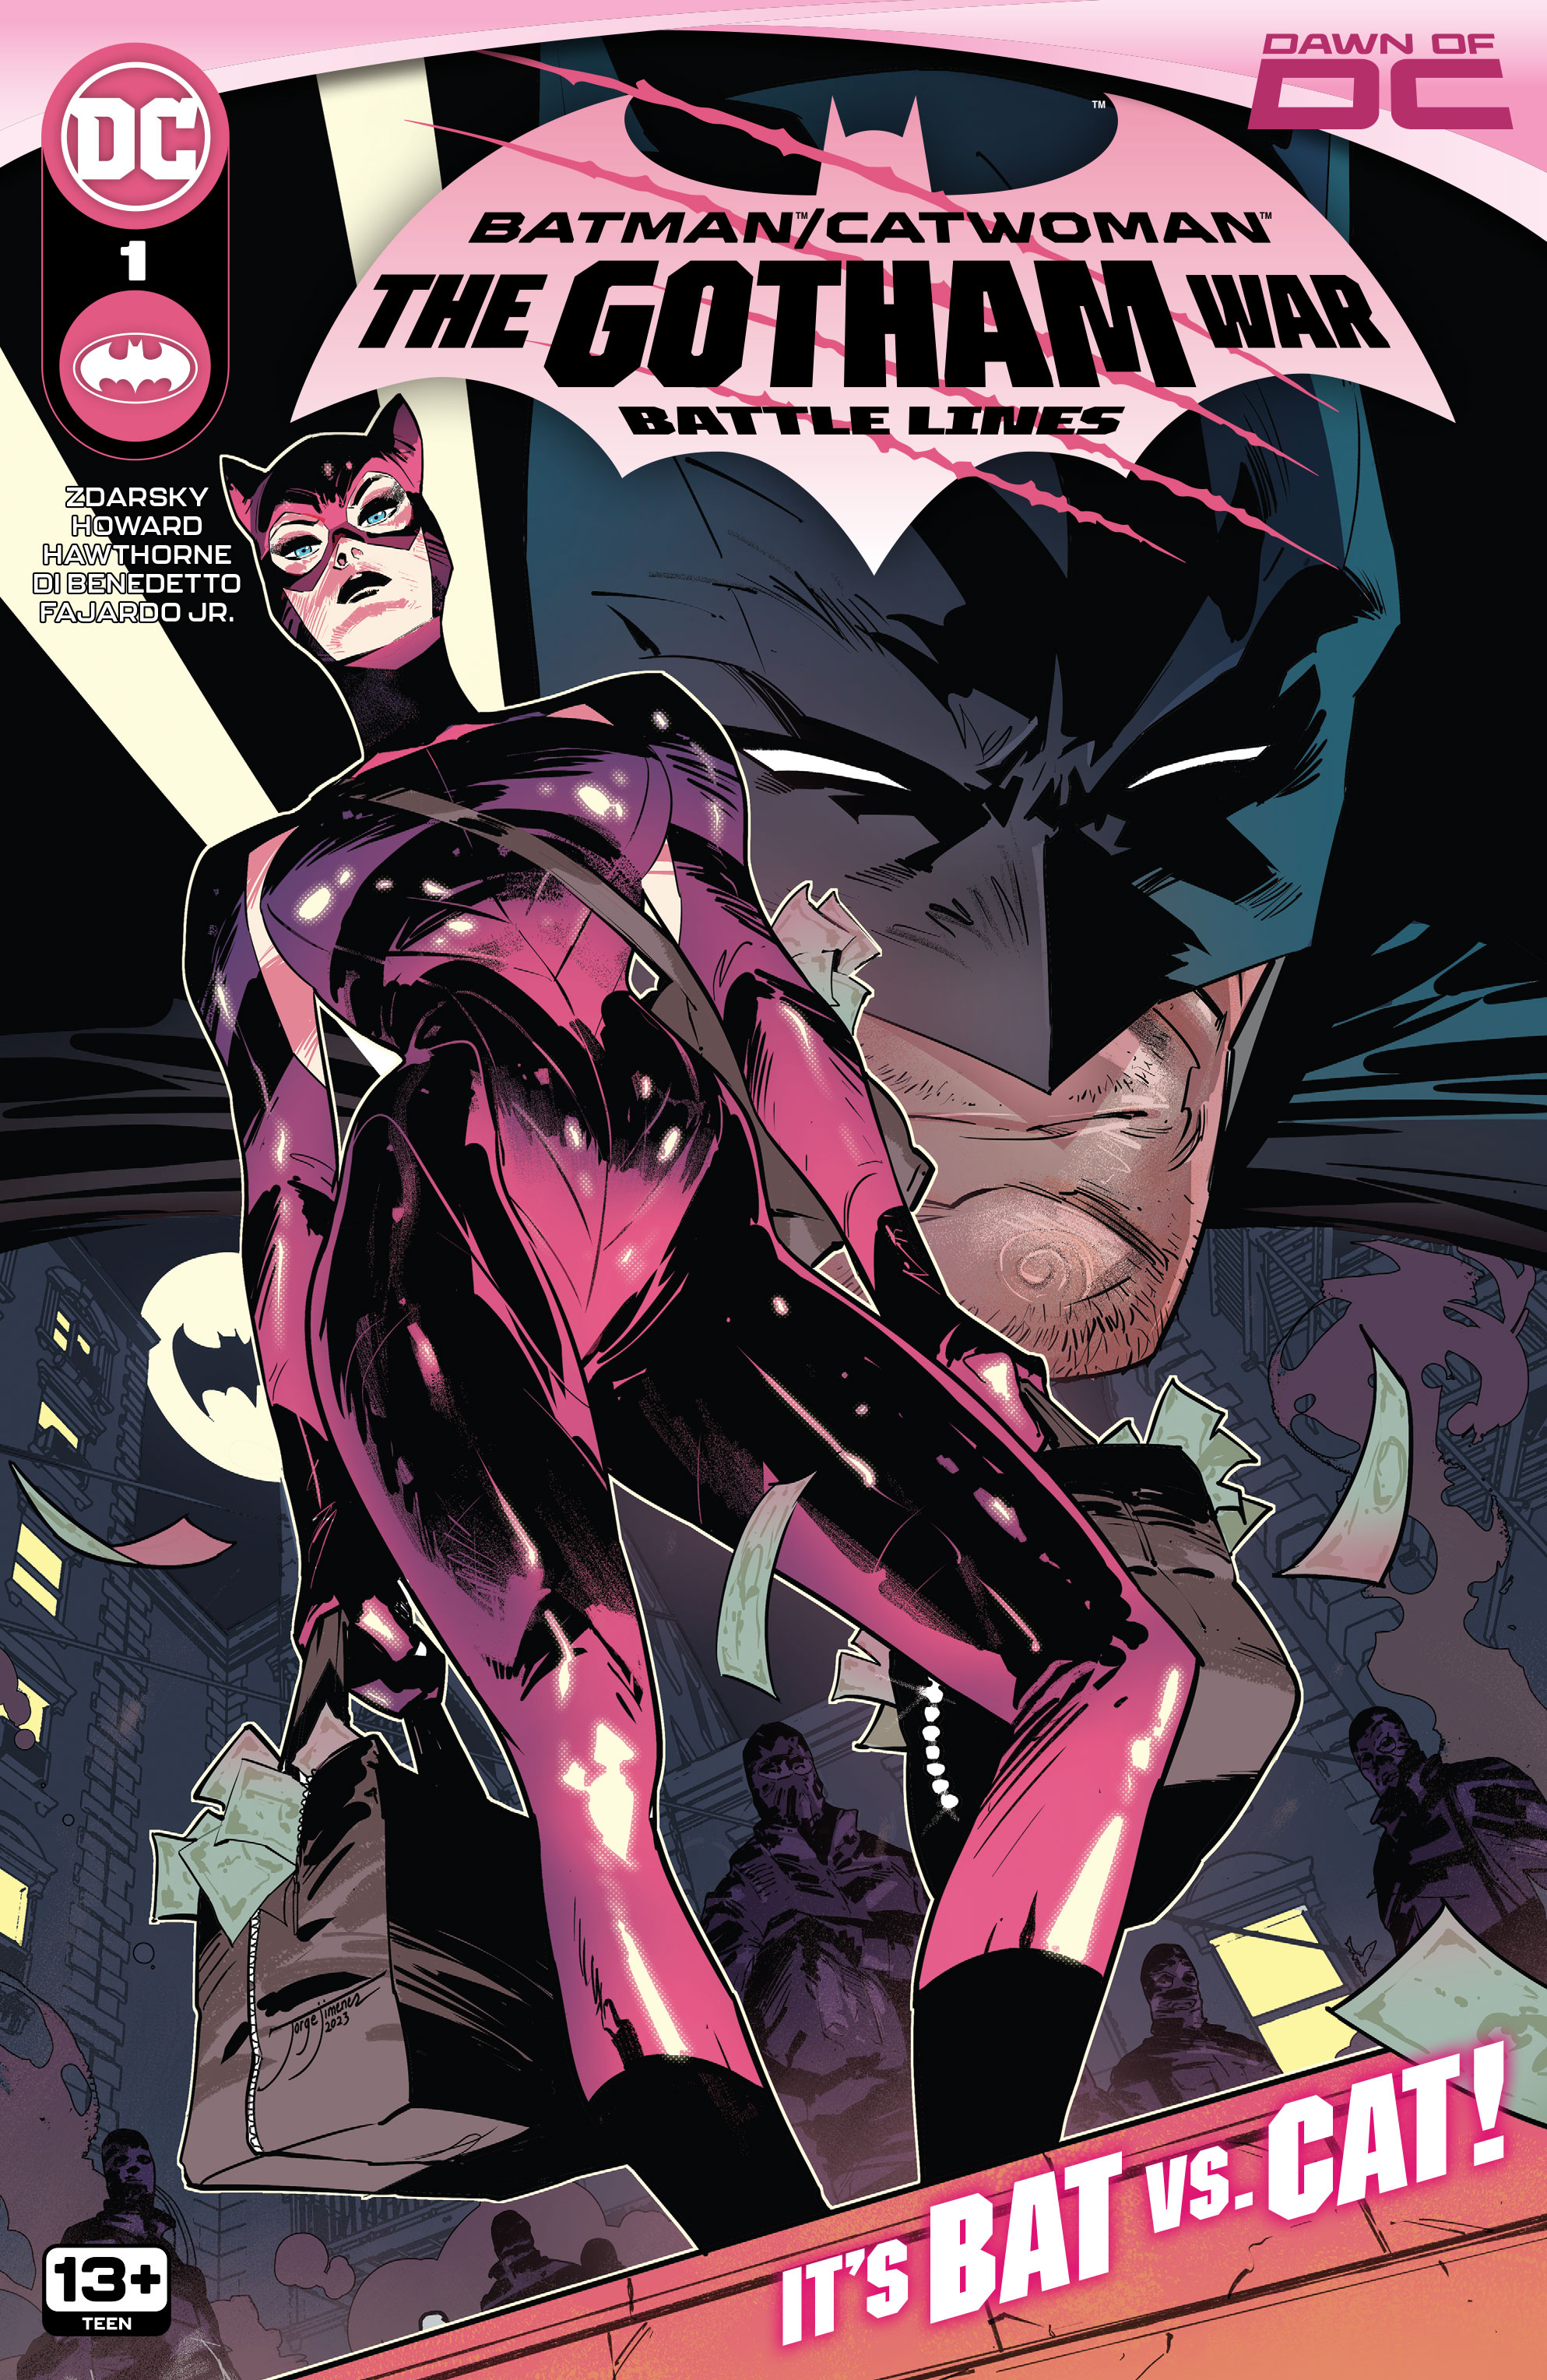 The cover for Batman/Catwoman: The Gotham War: Battle Lines #1